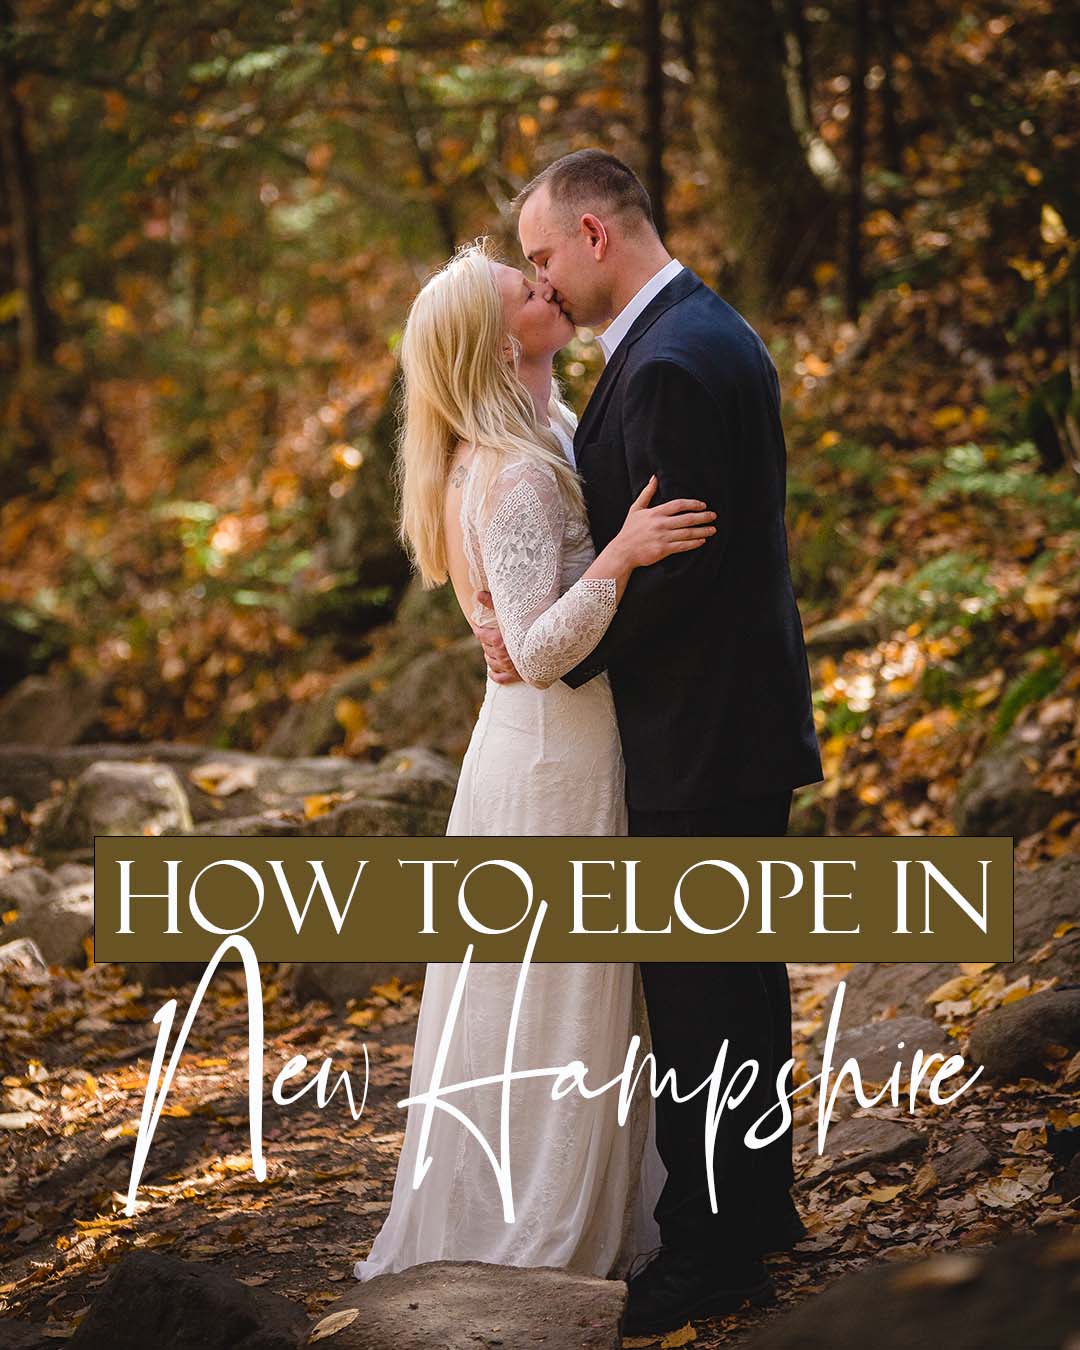 Elope NH 3 8x10 1 Elopements and non-traditional micro-weddings are on the rise! As a New England elopement photographer + planner, I've got the skinny on how to elope in New Hampshire. This post is full of elopement planning tips, as well as suggestions for some AH-mazing ideas on where to go and what to do for your elopement in New Hampshire.